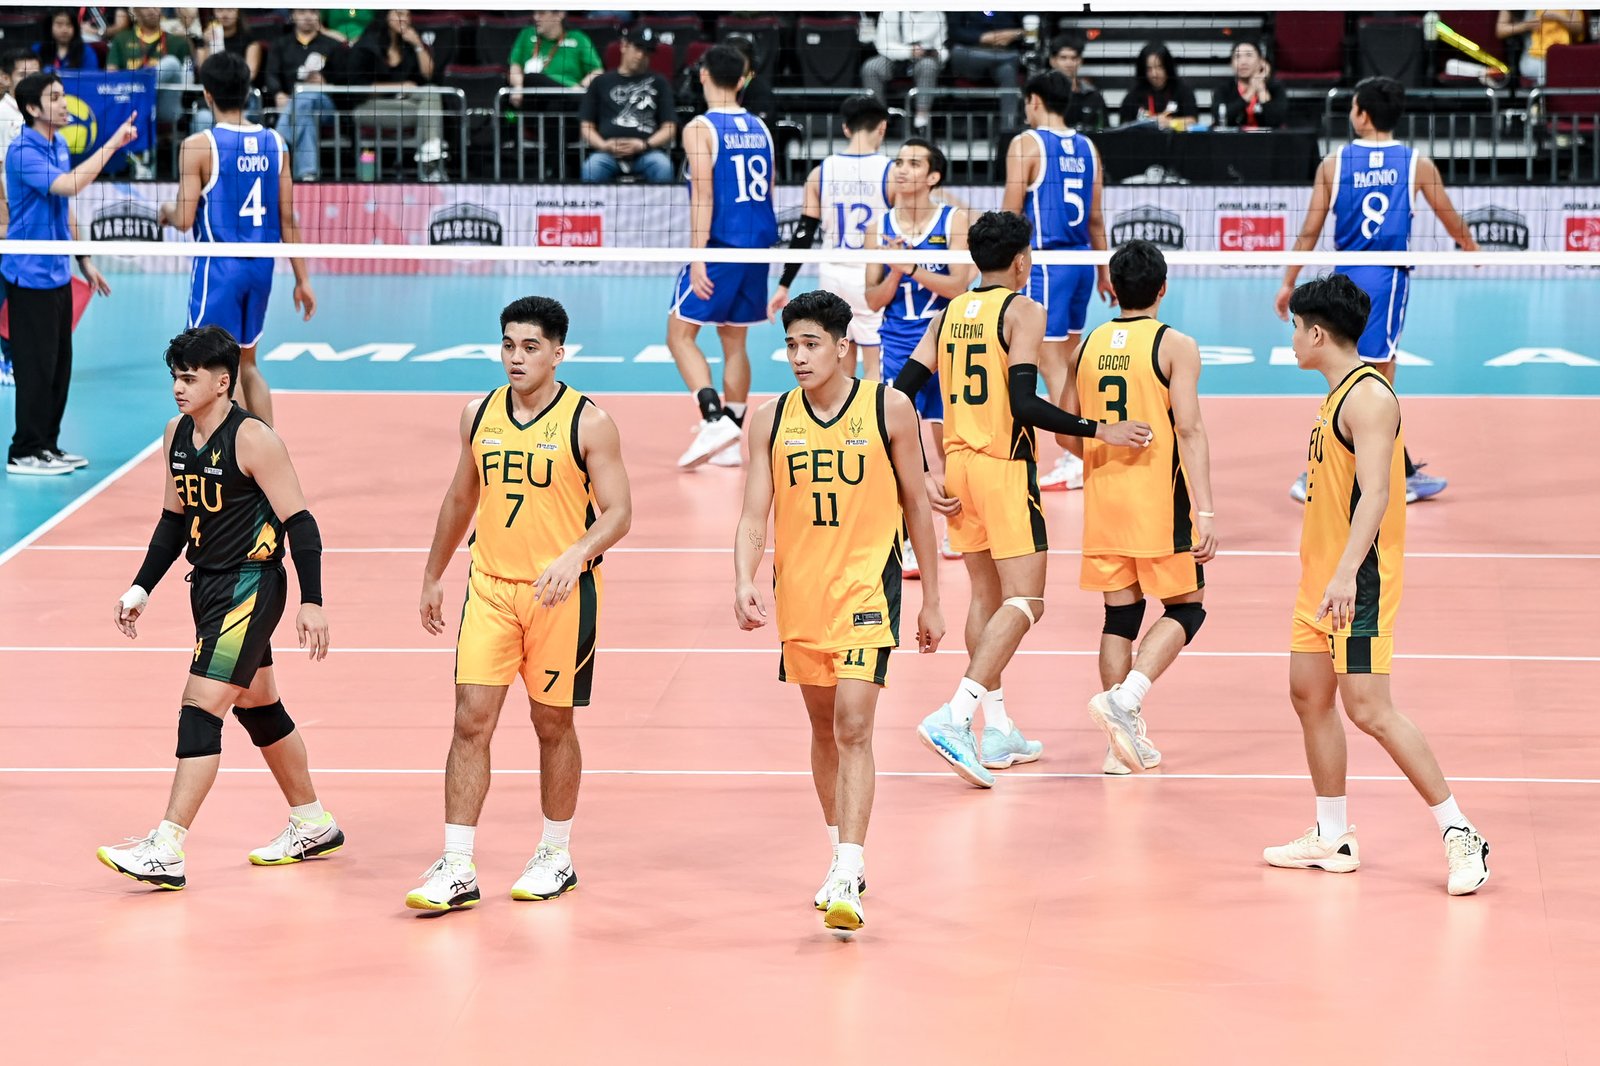 FEU survives Ateneo to keep top spot